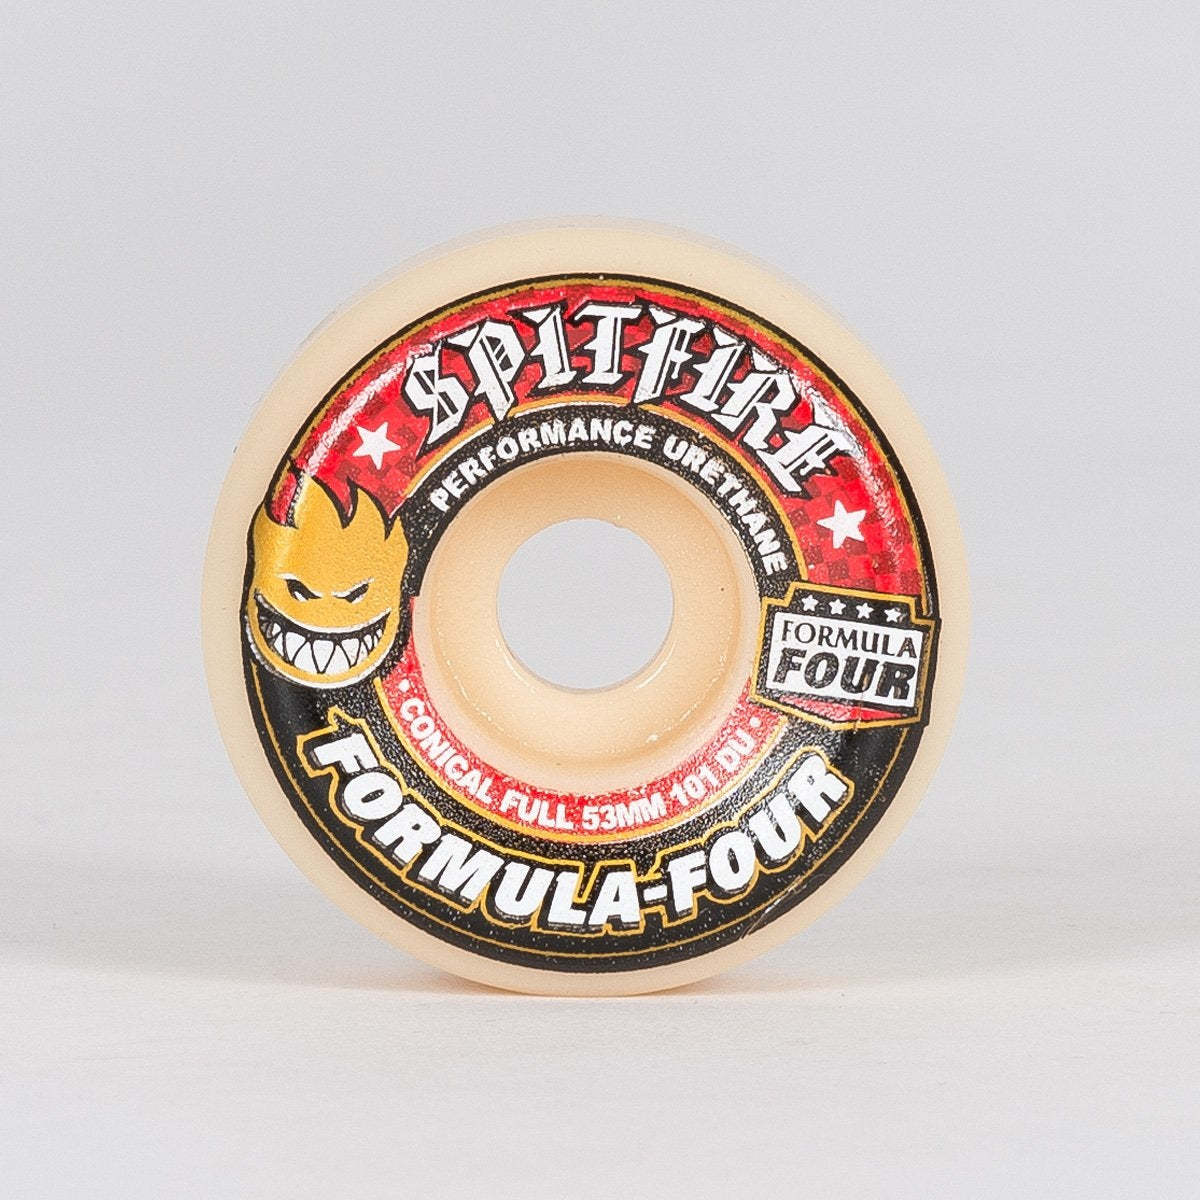 Spitfire Formula Four Conical Full 101a Wheels White/Red 53mm - Skateboard